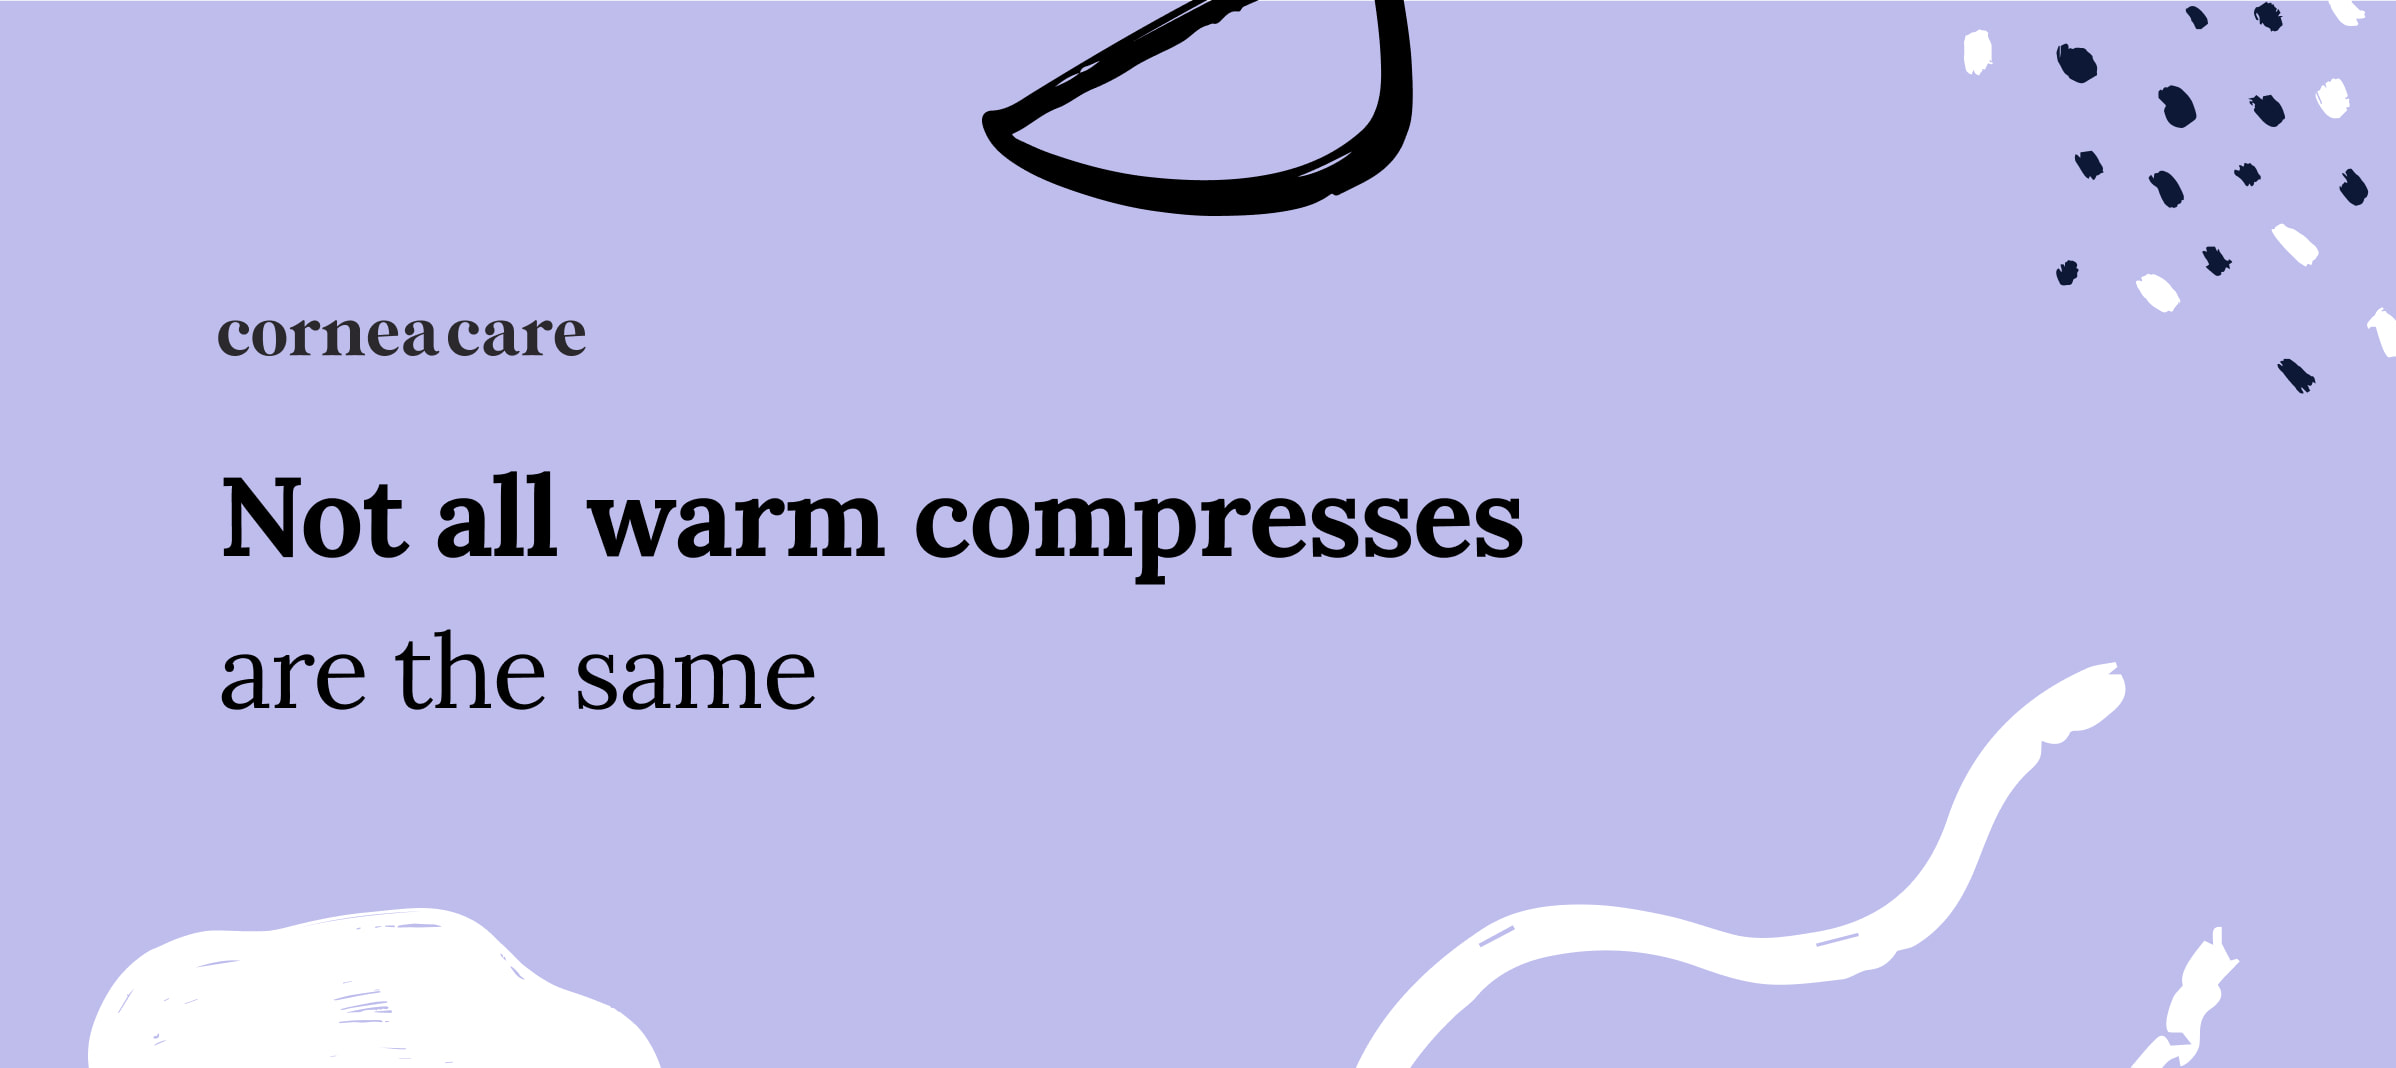 3 types of eye warm compresses